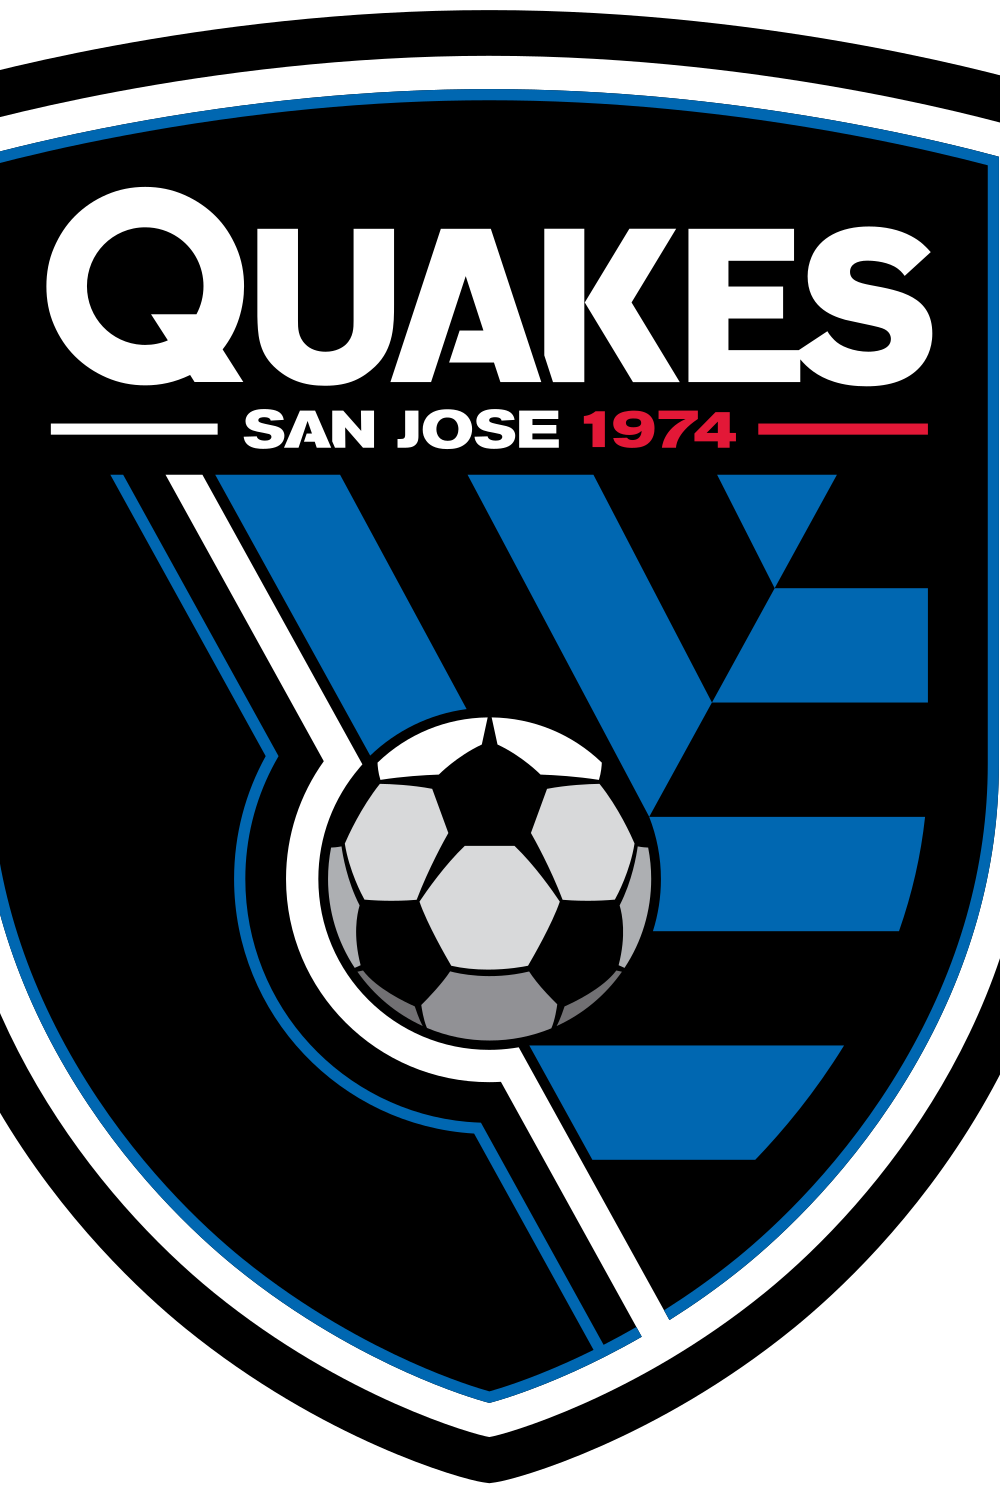 San Jose Earthquakes logo, a shield in blue and black with a soccer ball in the middle